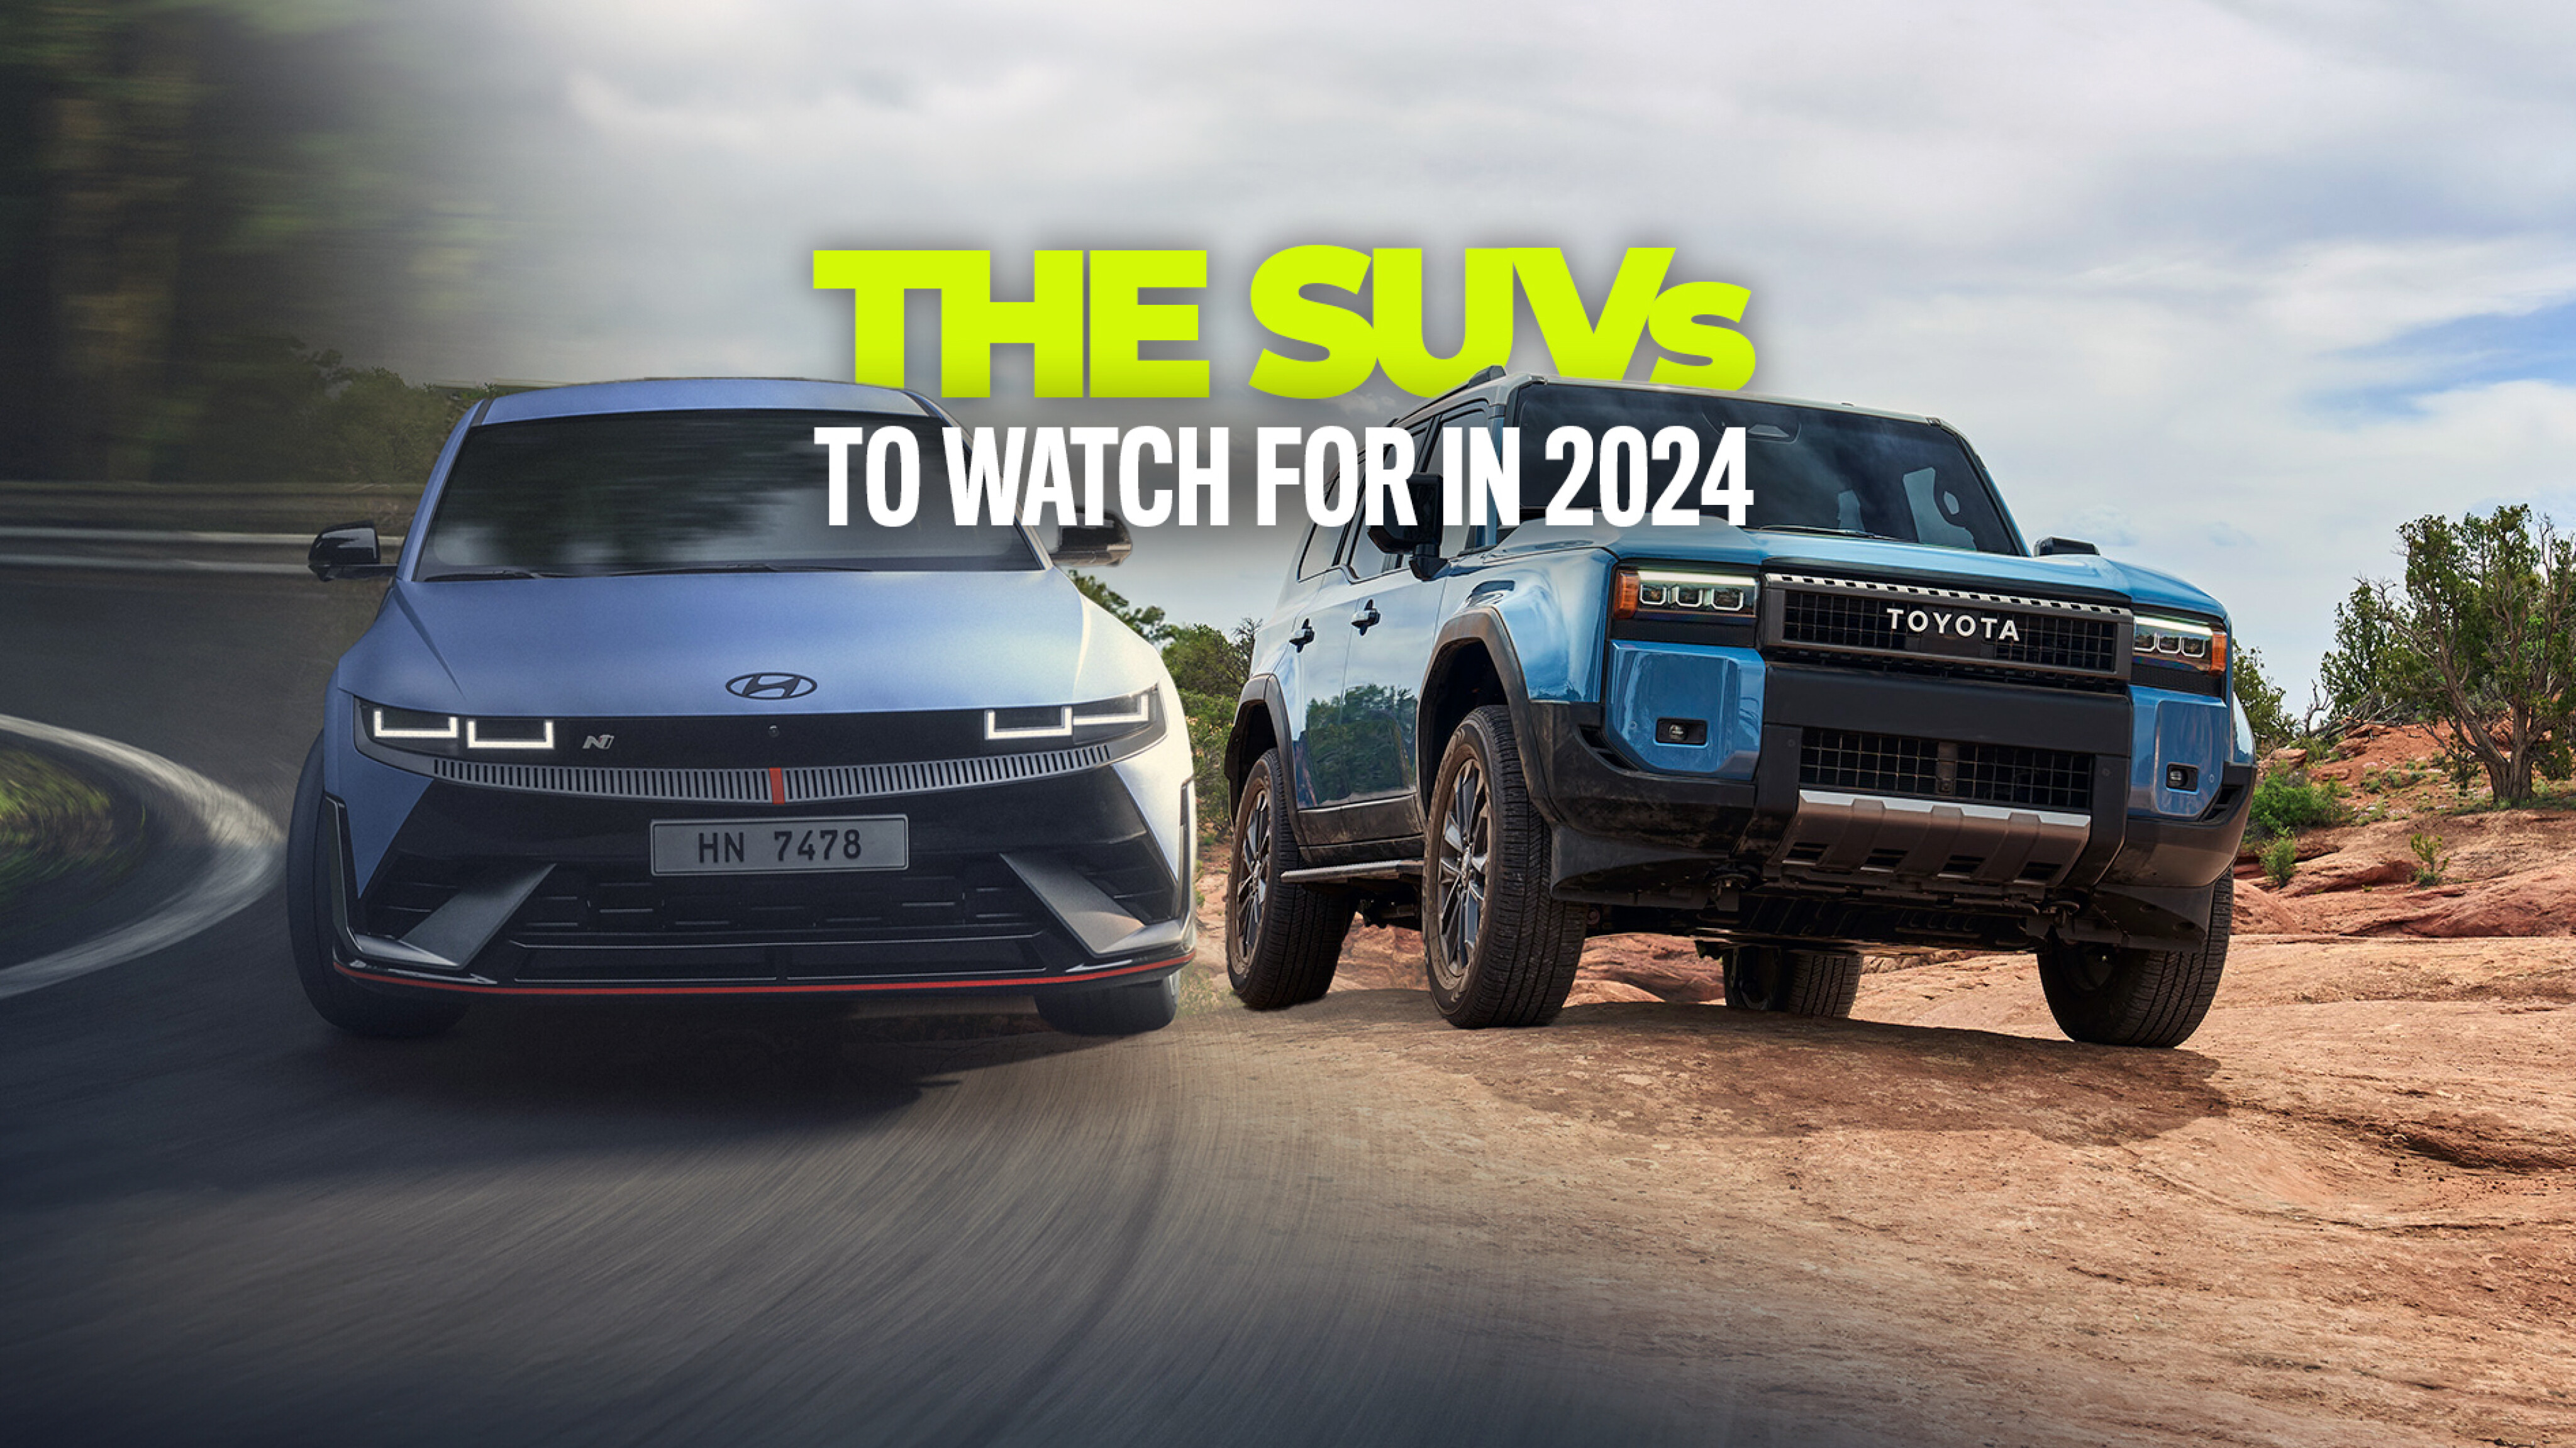 The new SUVs to watch for in 2024